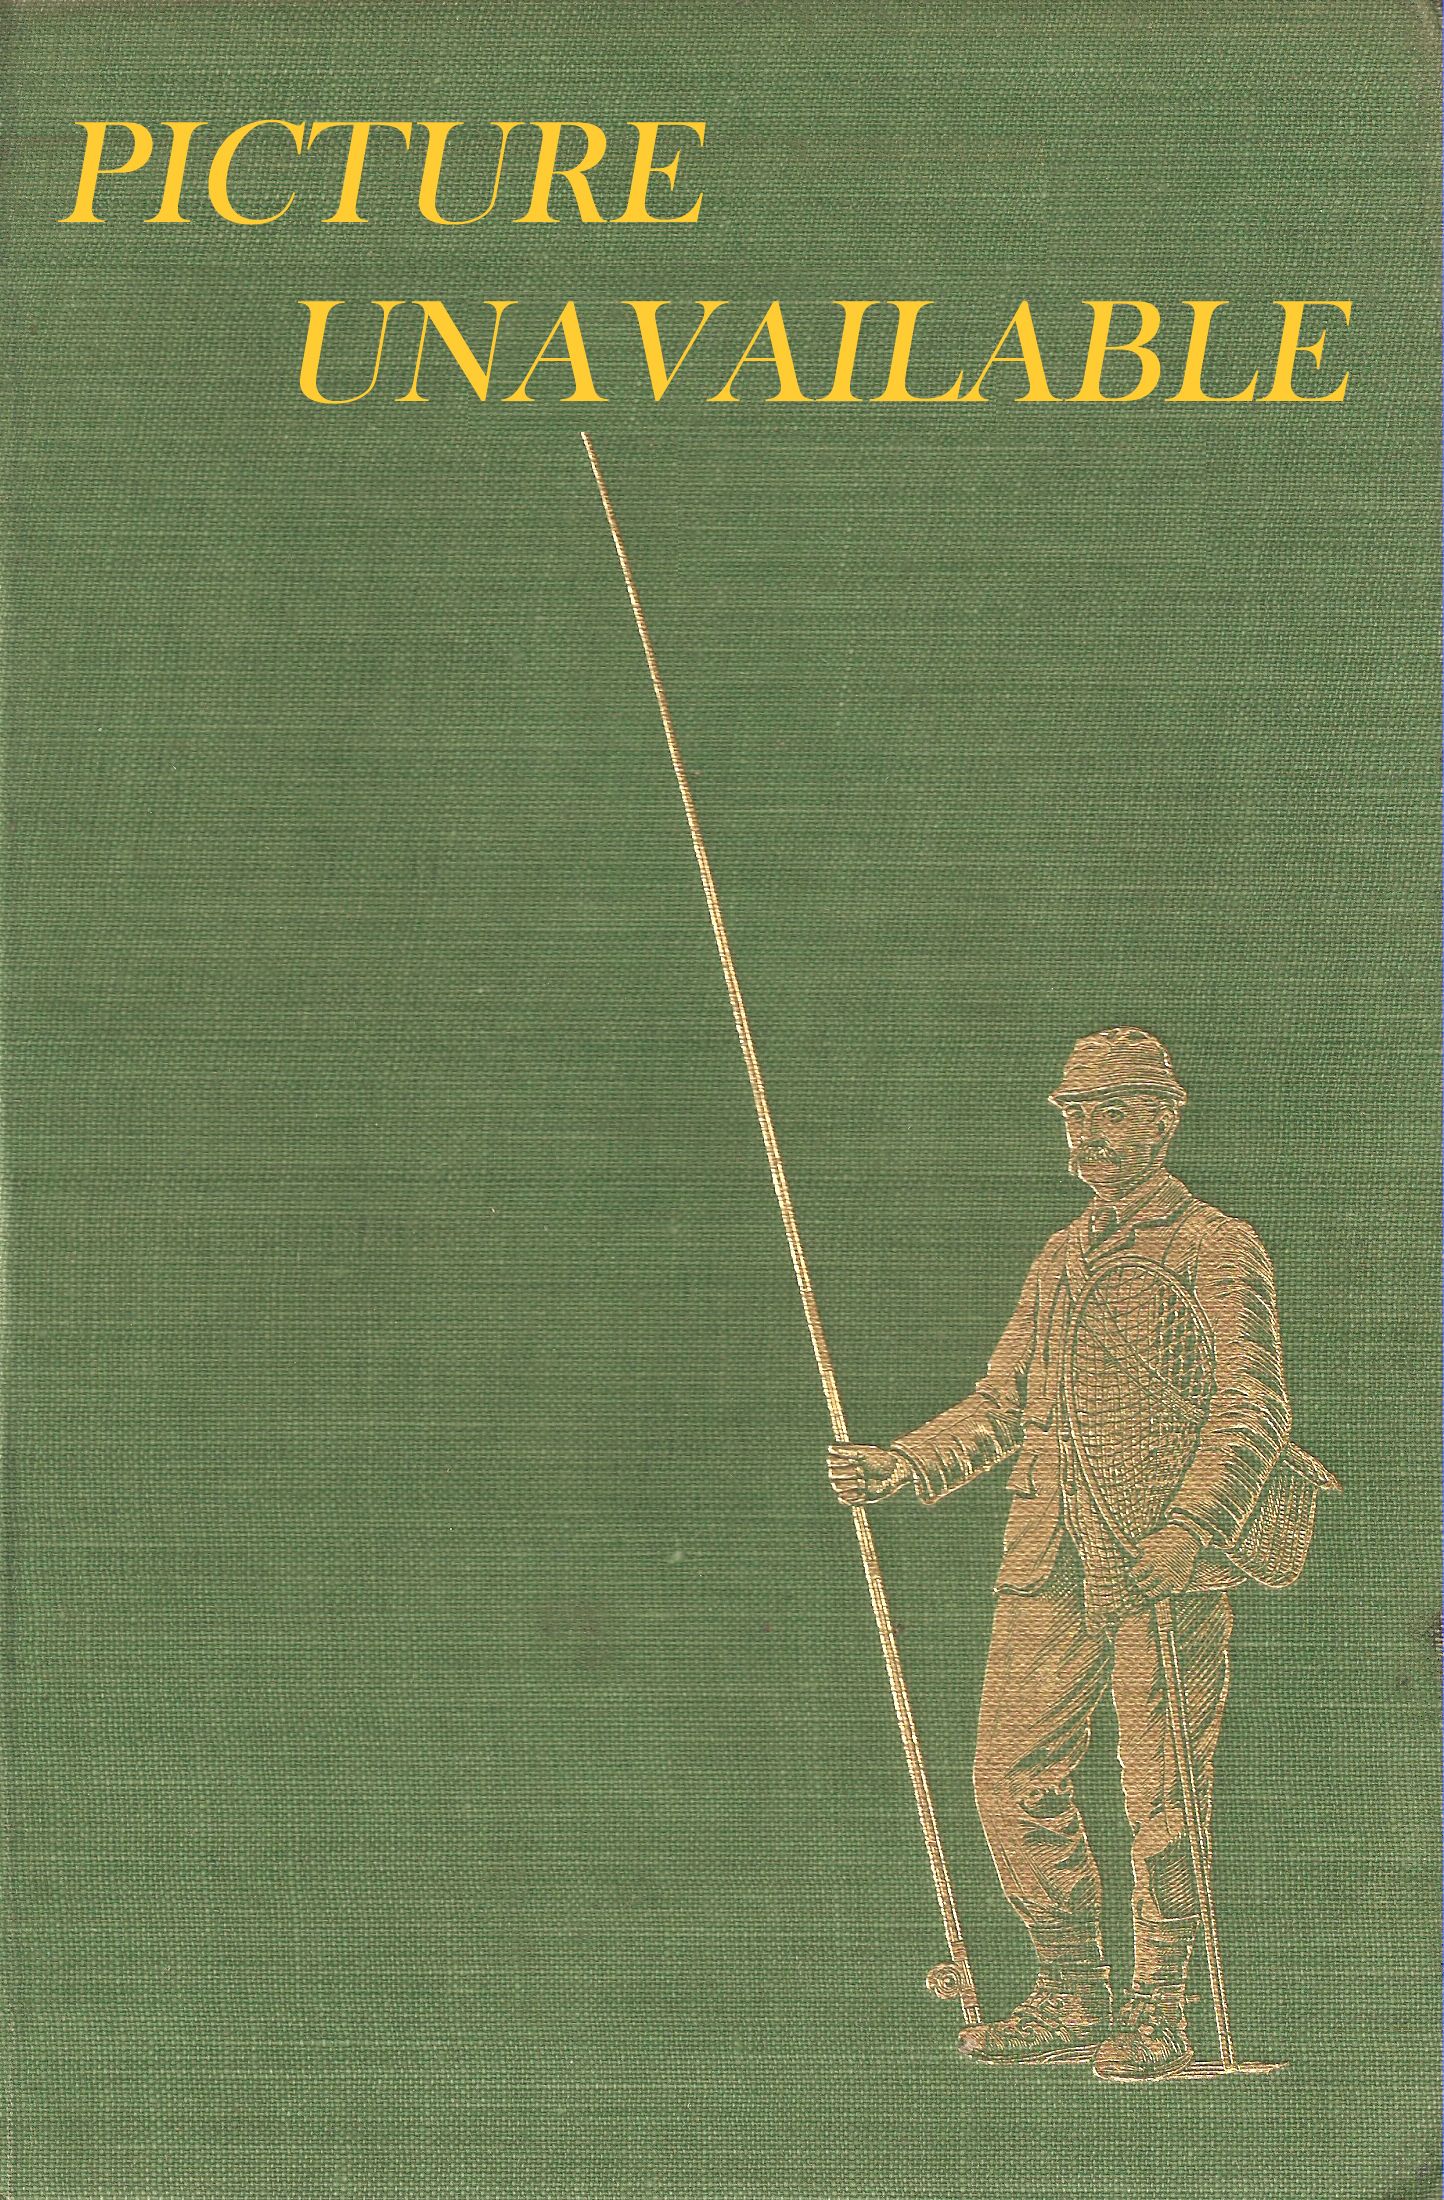 AN INTRODUCTION TO HUNTING. By John Williams M.F.H.